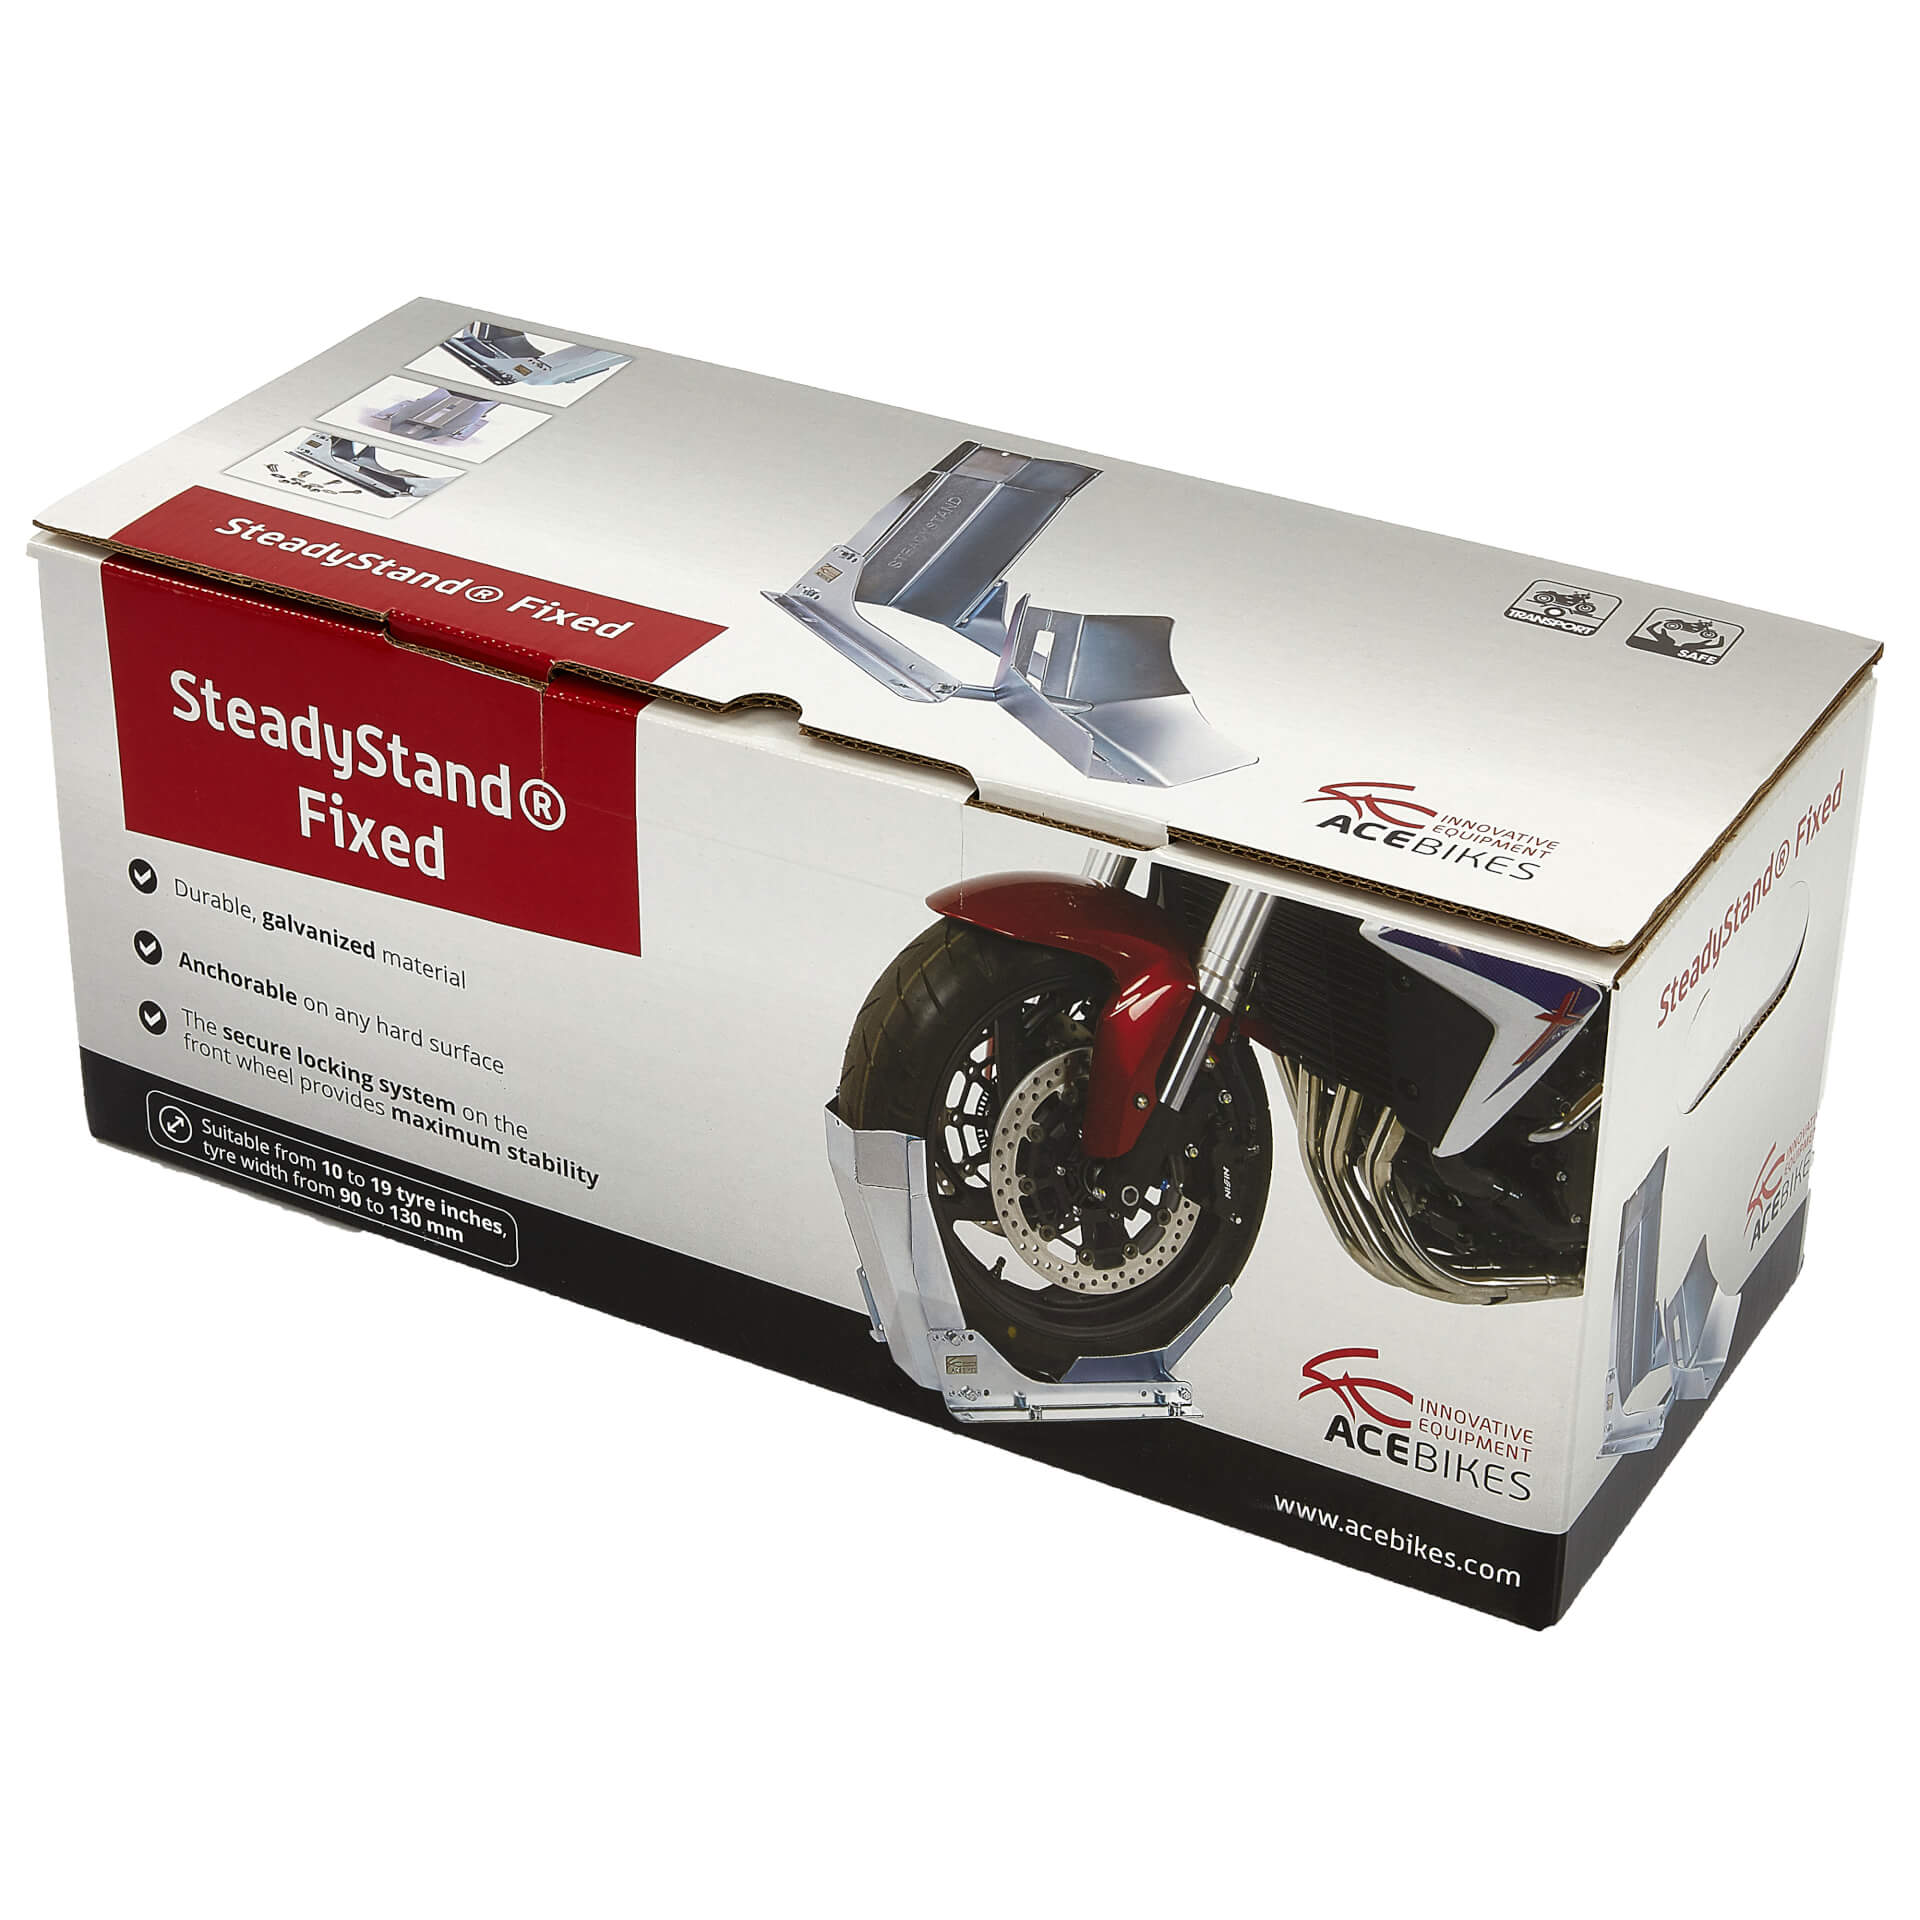 acebikes Motorcycle stand STEADYSTAND AC 152